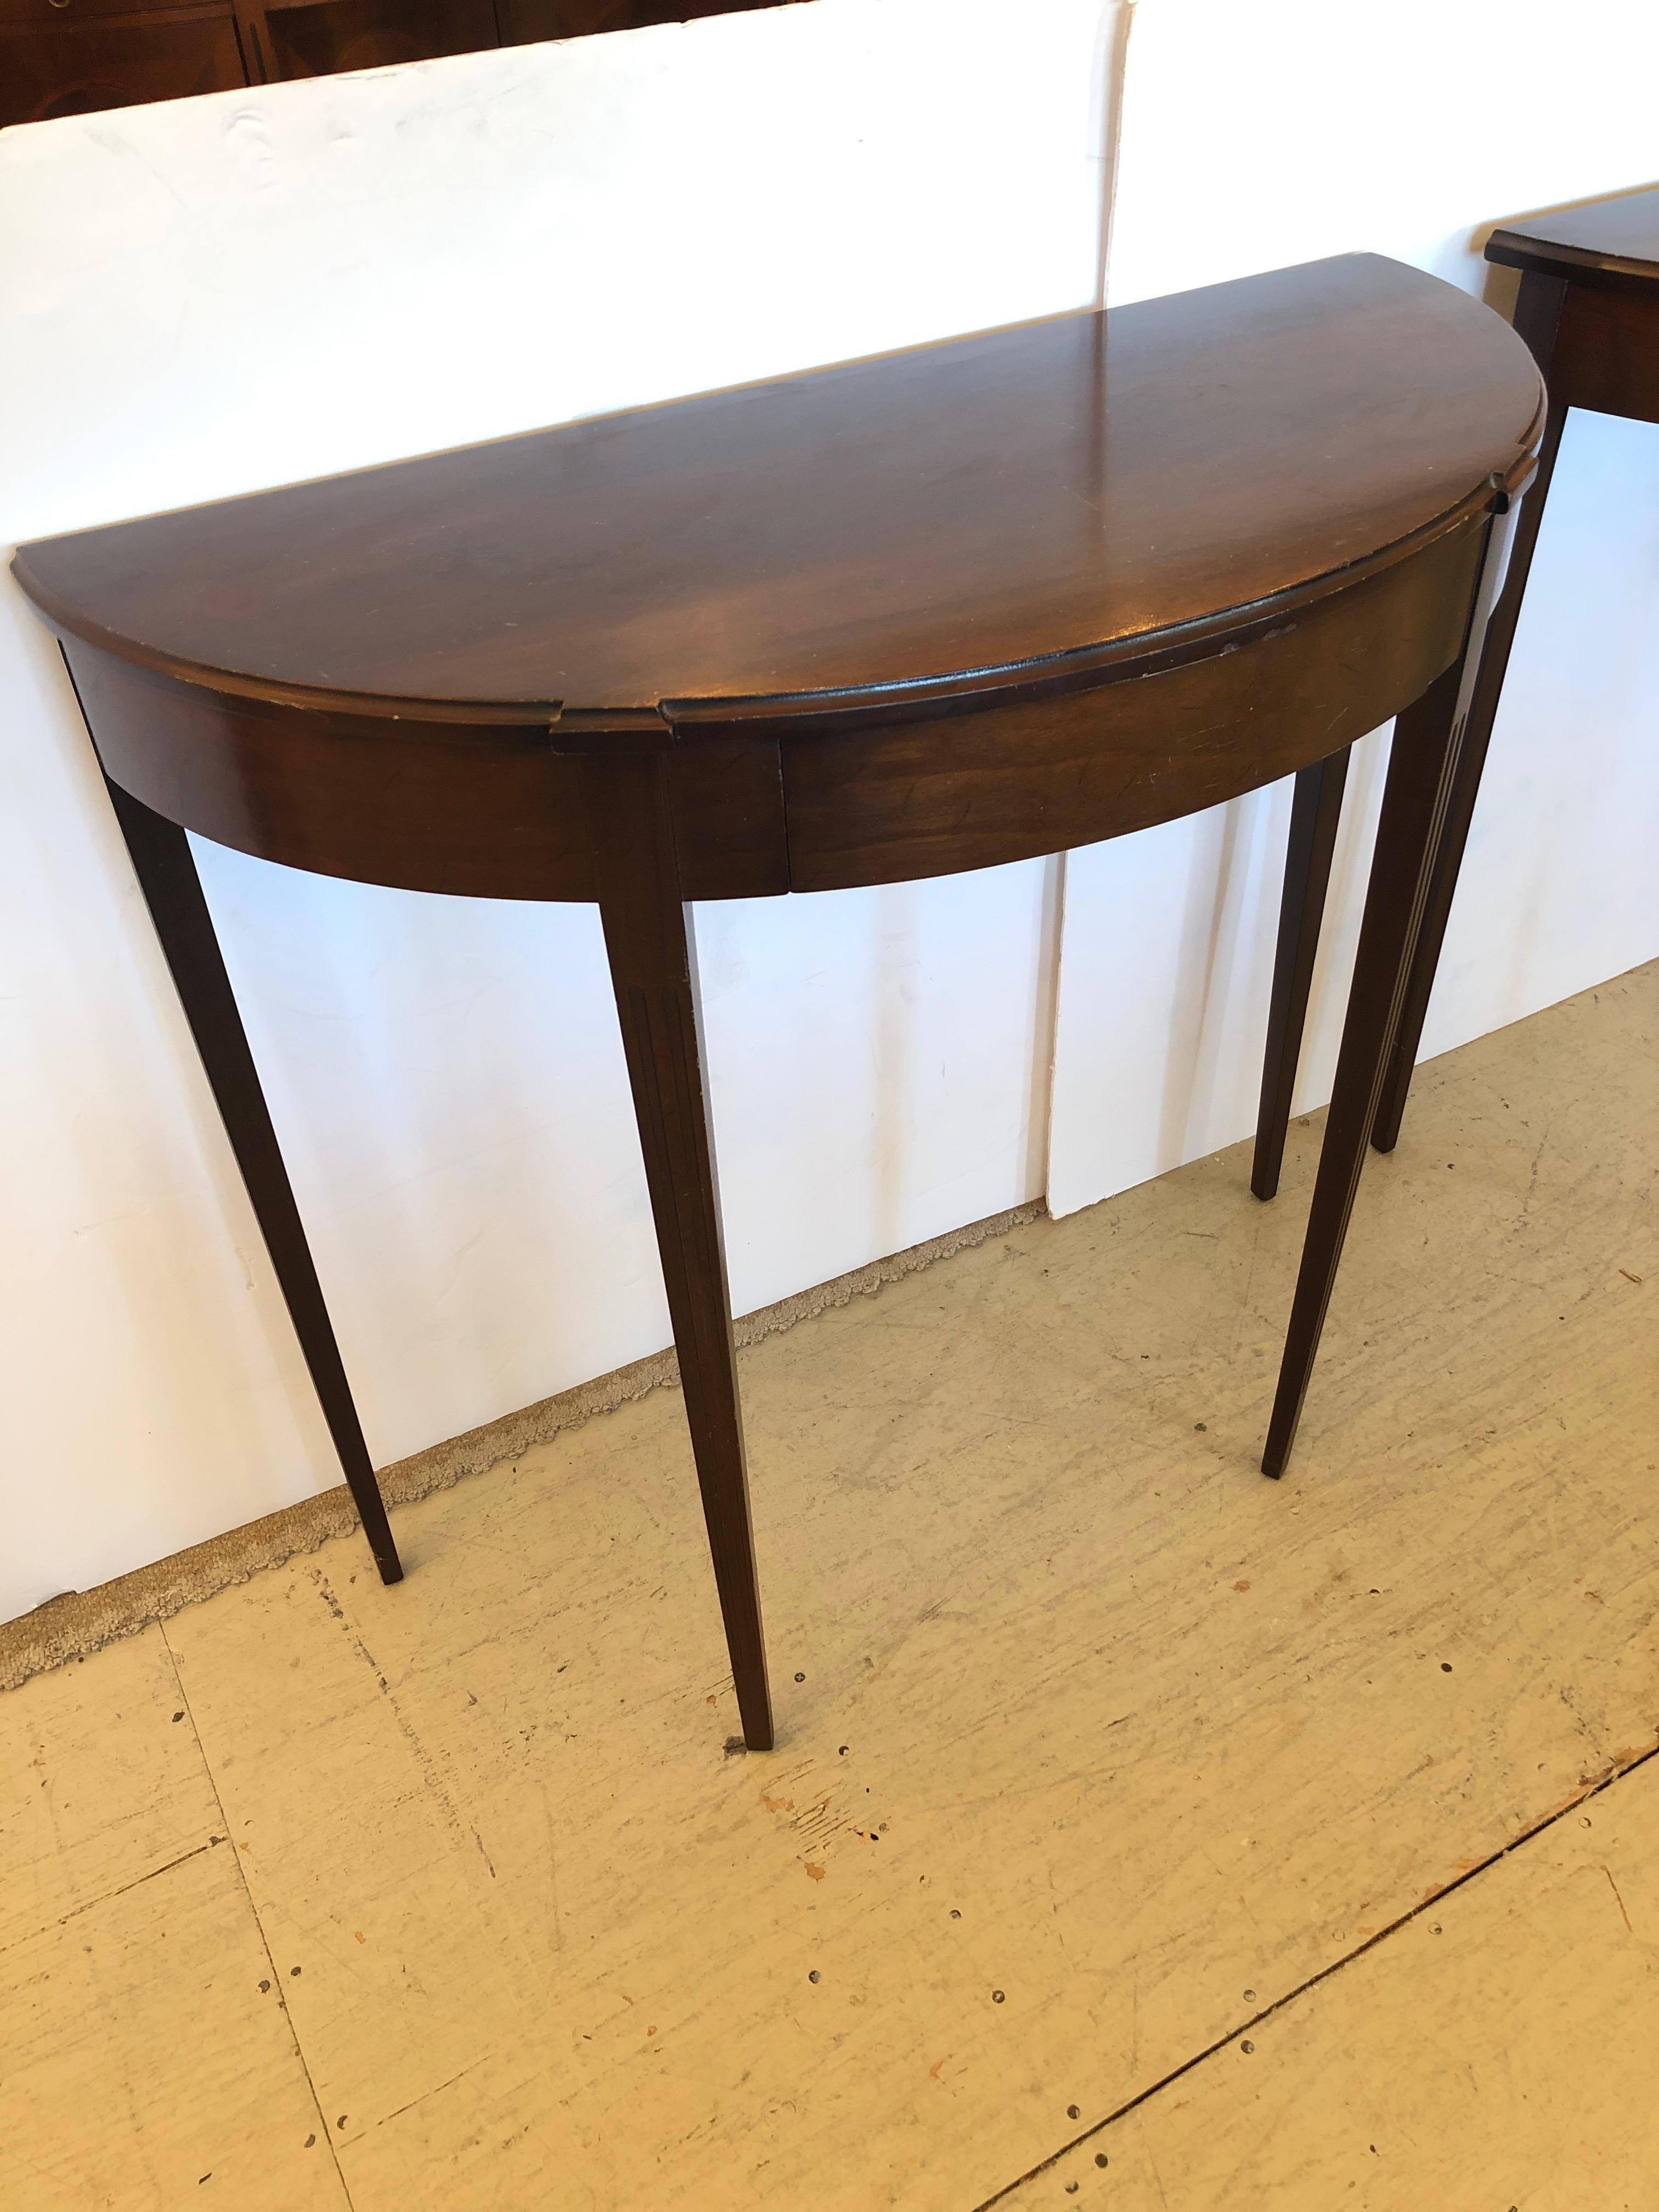 Refined pair of mahogany Hepplewhite style demilune shaped console tables having lovely tapered legs and classic simple elegance.